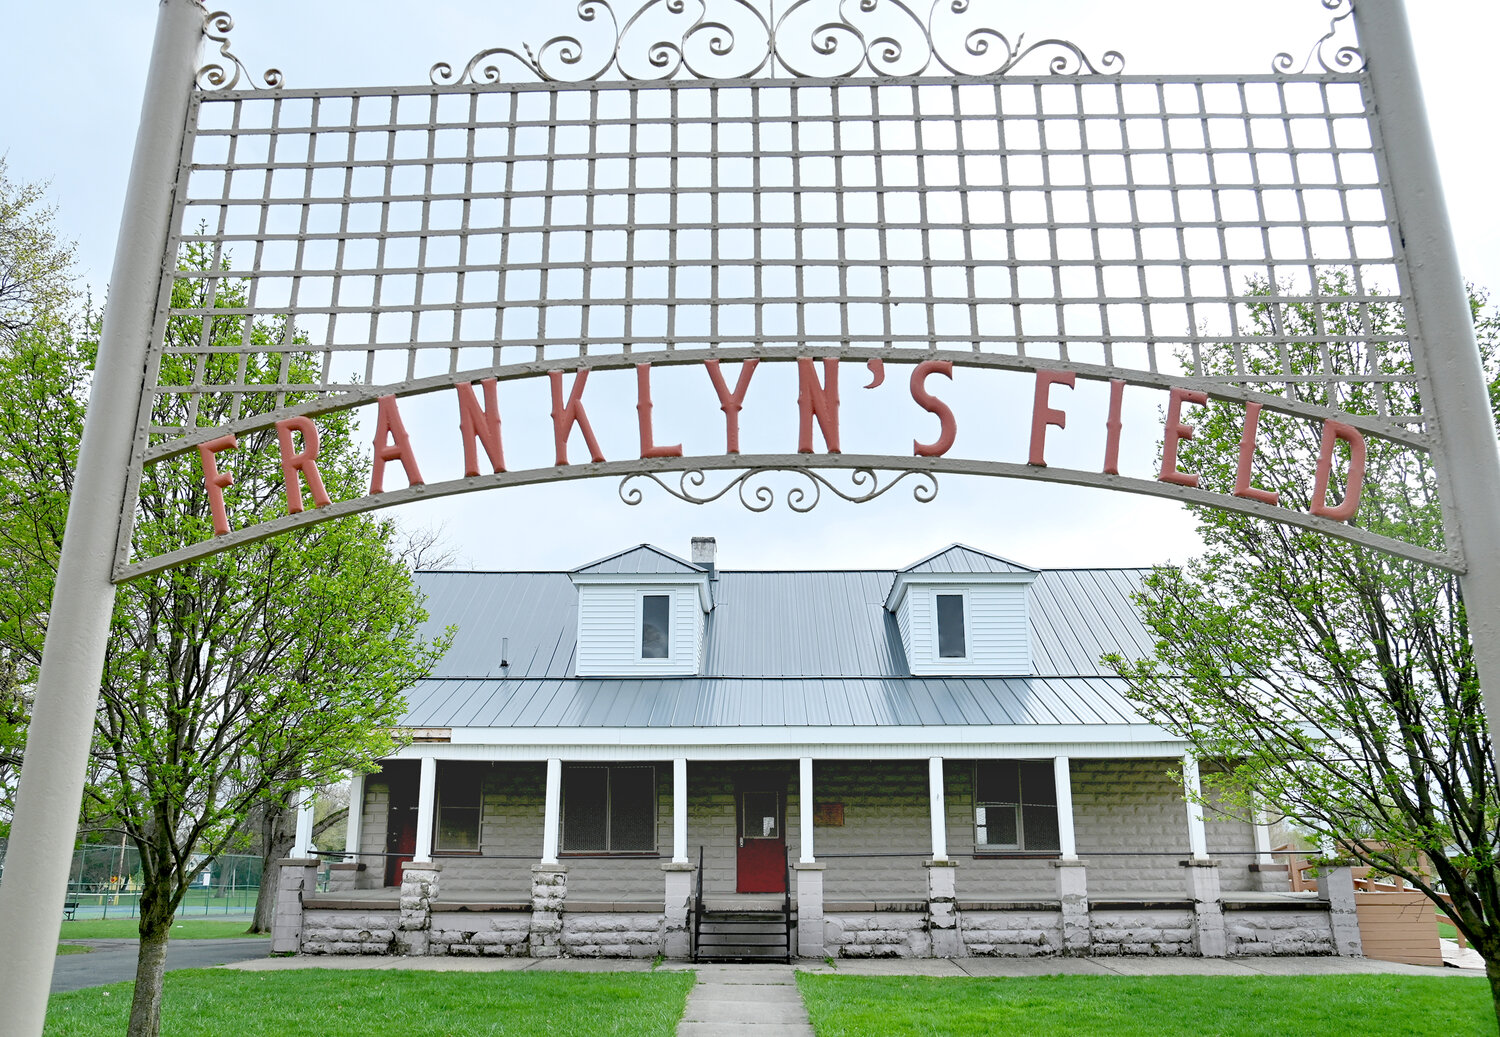 Repairs to the Franklyn’s Field Clubhouse are among Mayor Izzo’s recommendations for using the last of the city’s ARPA funding. Izzo said her administration found a vendor who has matched the masonry, and the materials have already been purchased.